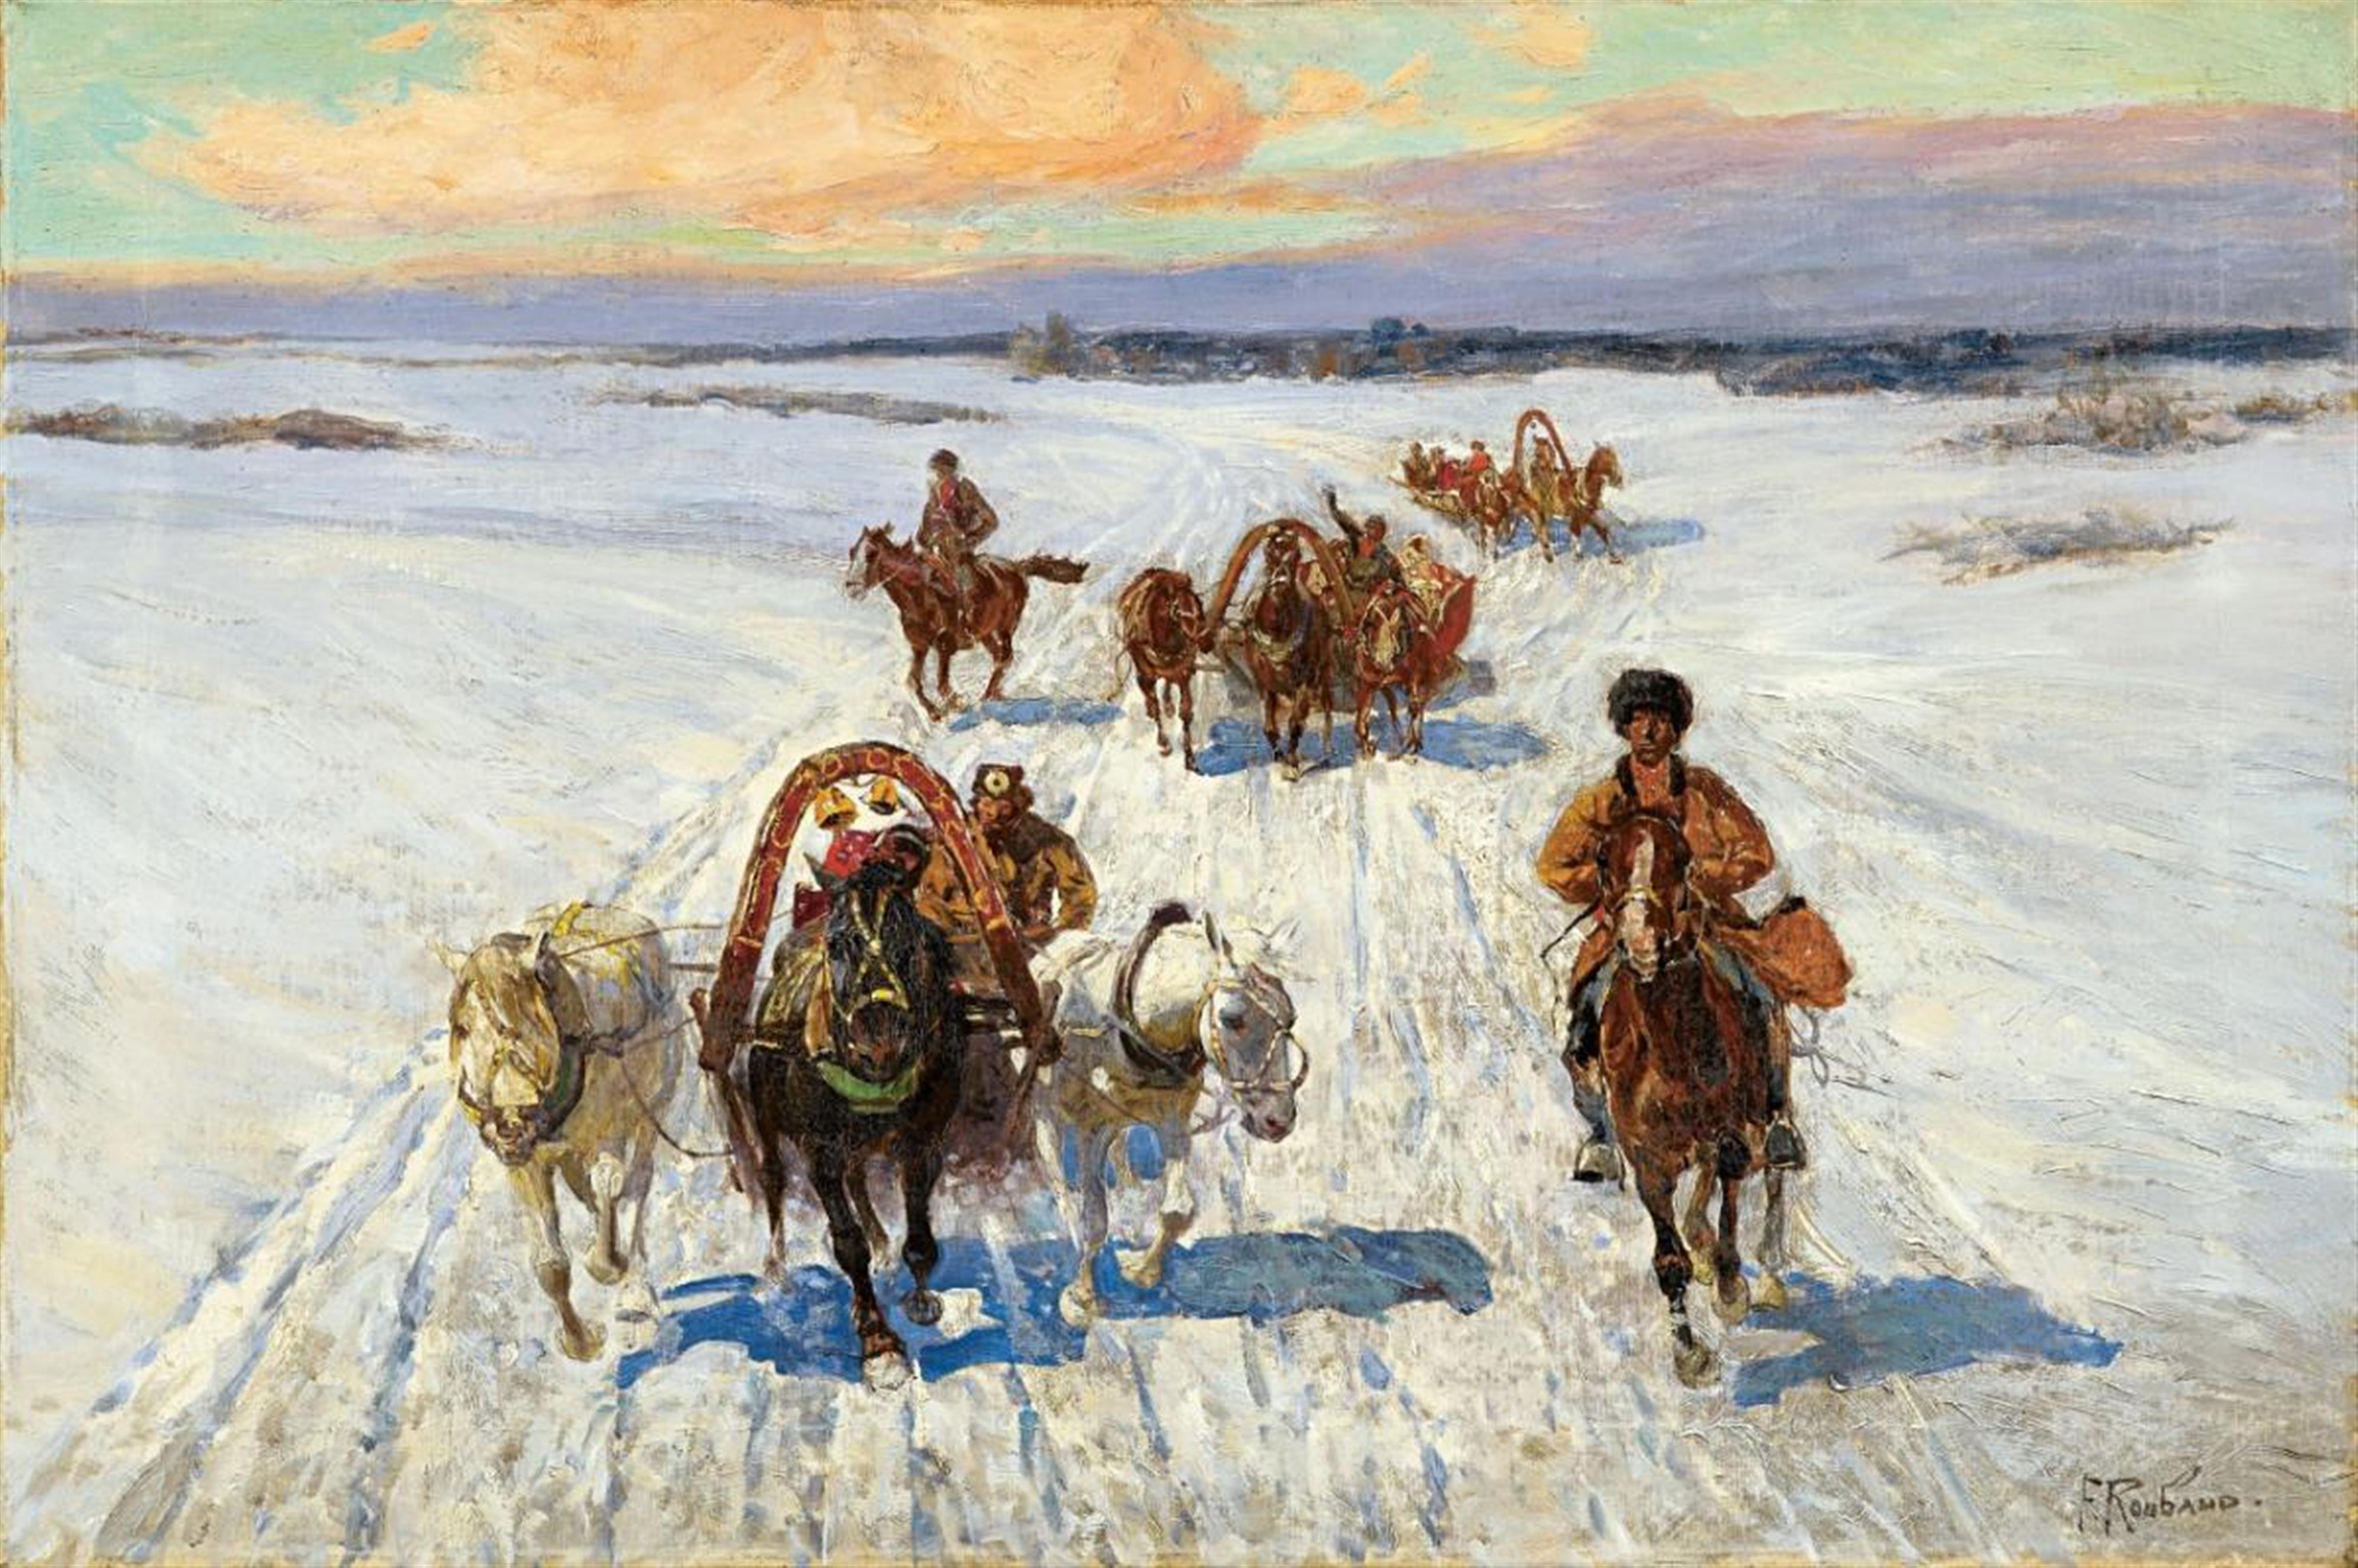 Franz Alekseyevich Roubaud - CIRCASSIAN RIDERS AND HORSE-CARTS IN A WINTER LANDSCAPE - image-1